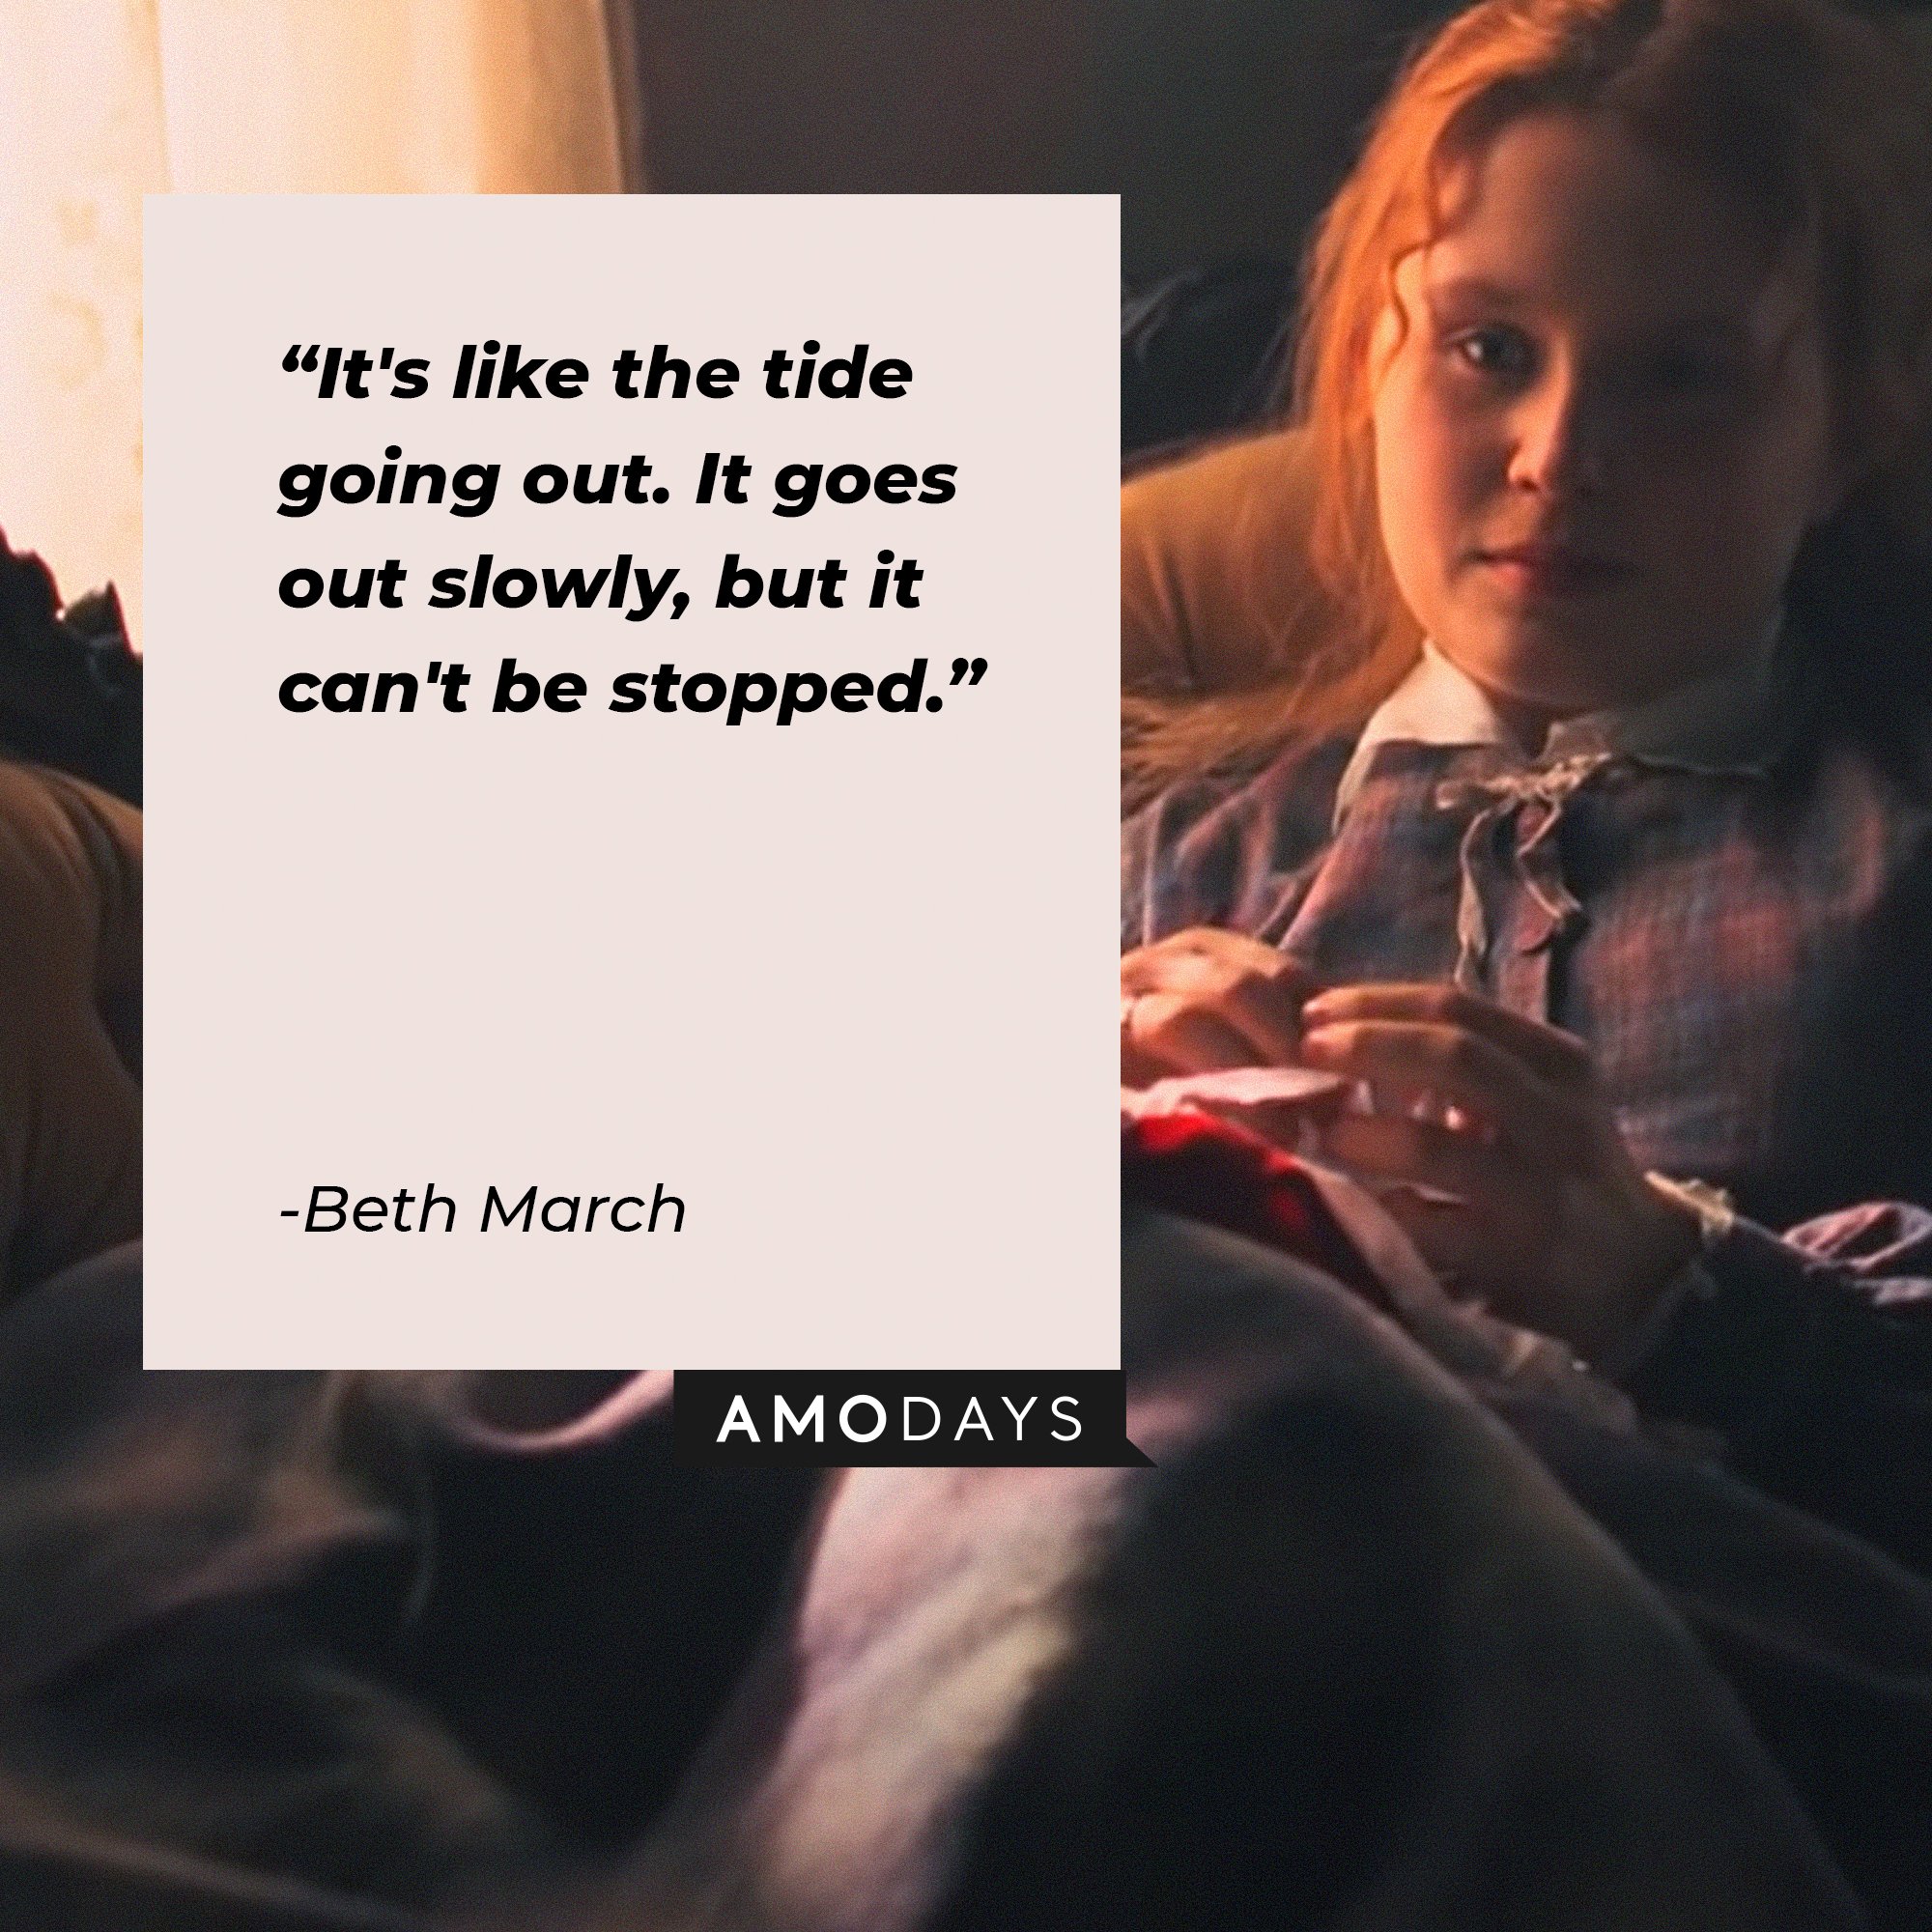 Beth March’s quote: “It's like the tide going out. It goes out slowly, but it can't be stopped.” | Image: AmoDays